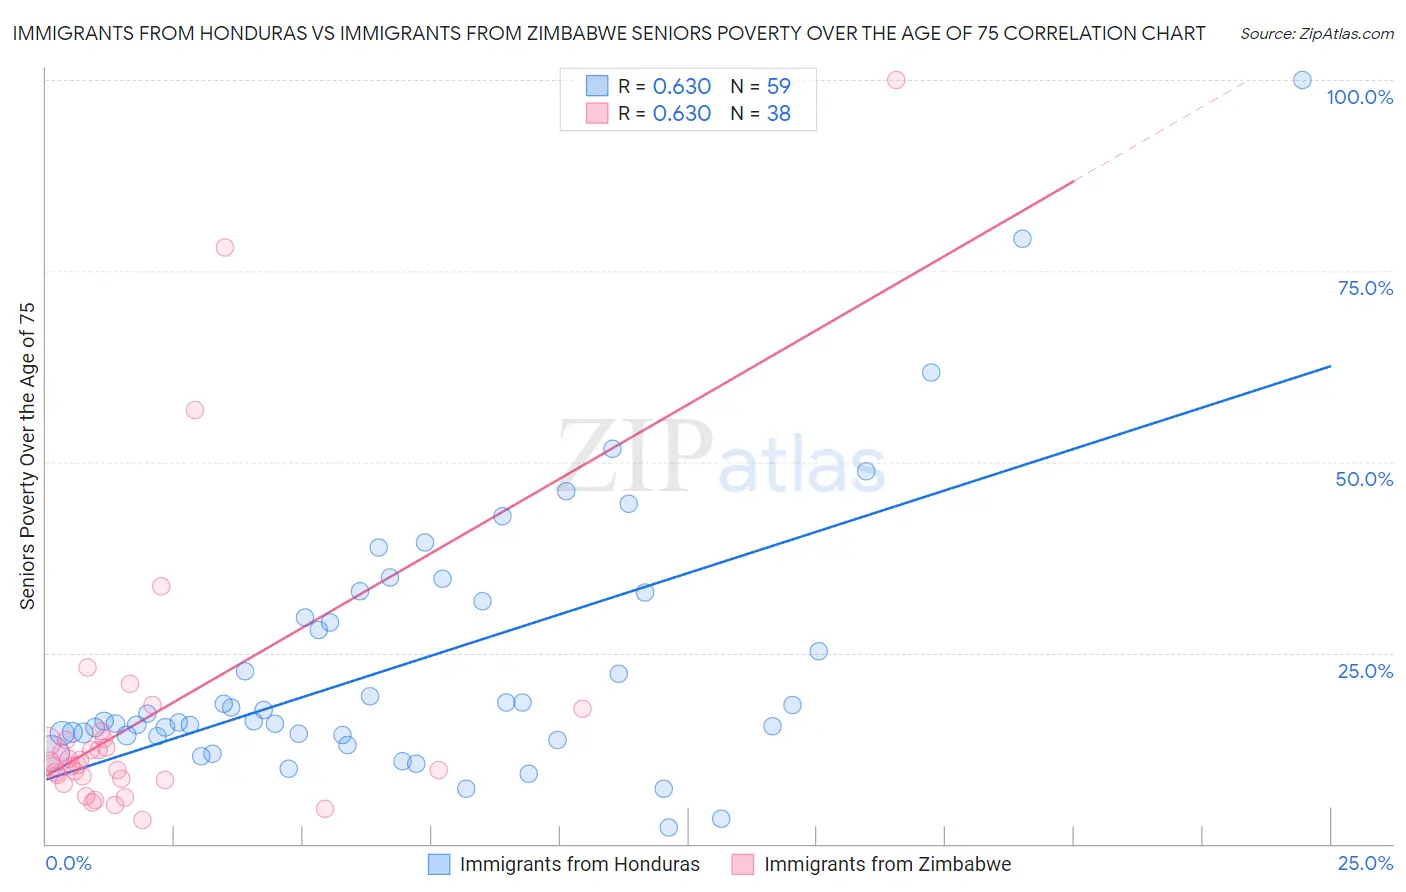 Immigrants from Honduras vs Immigrants from Zimbabwe Seniors Poverty Over the Age of 75